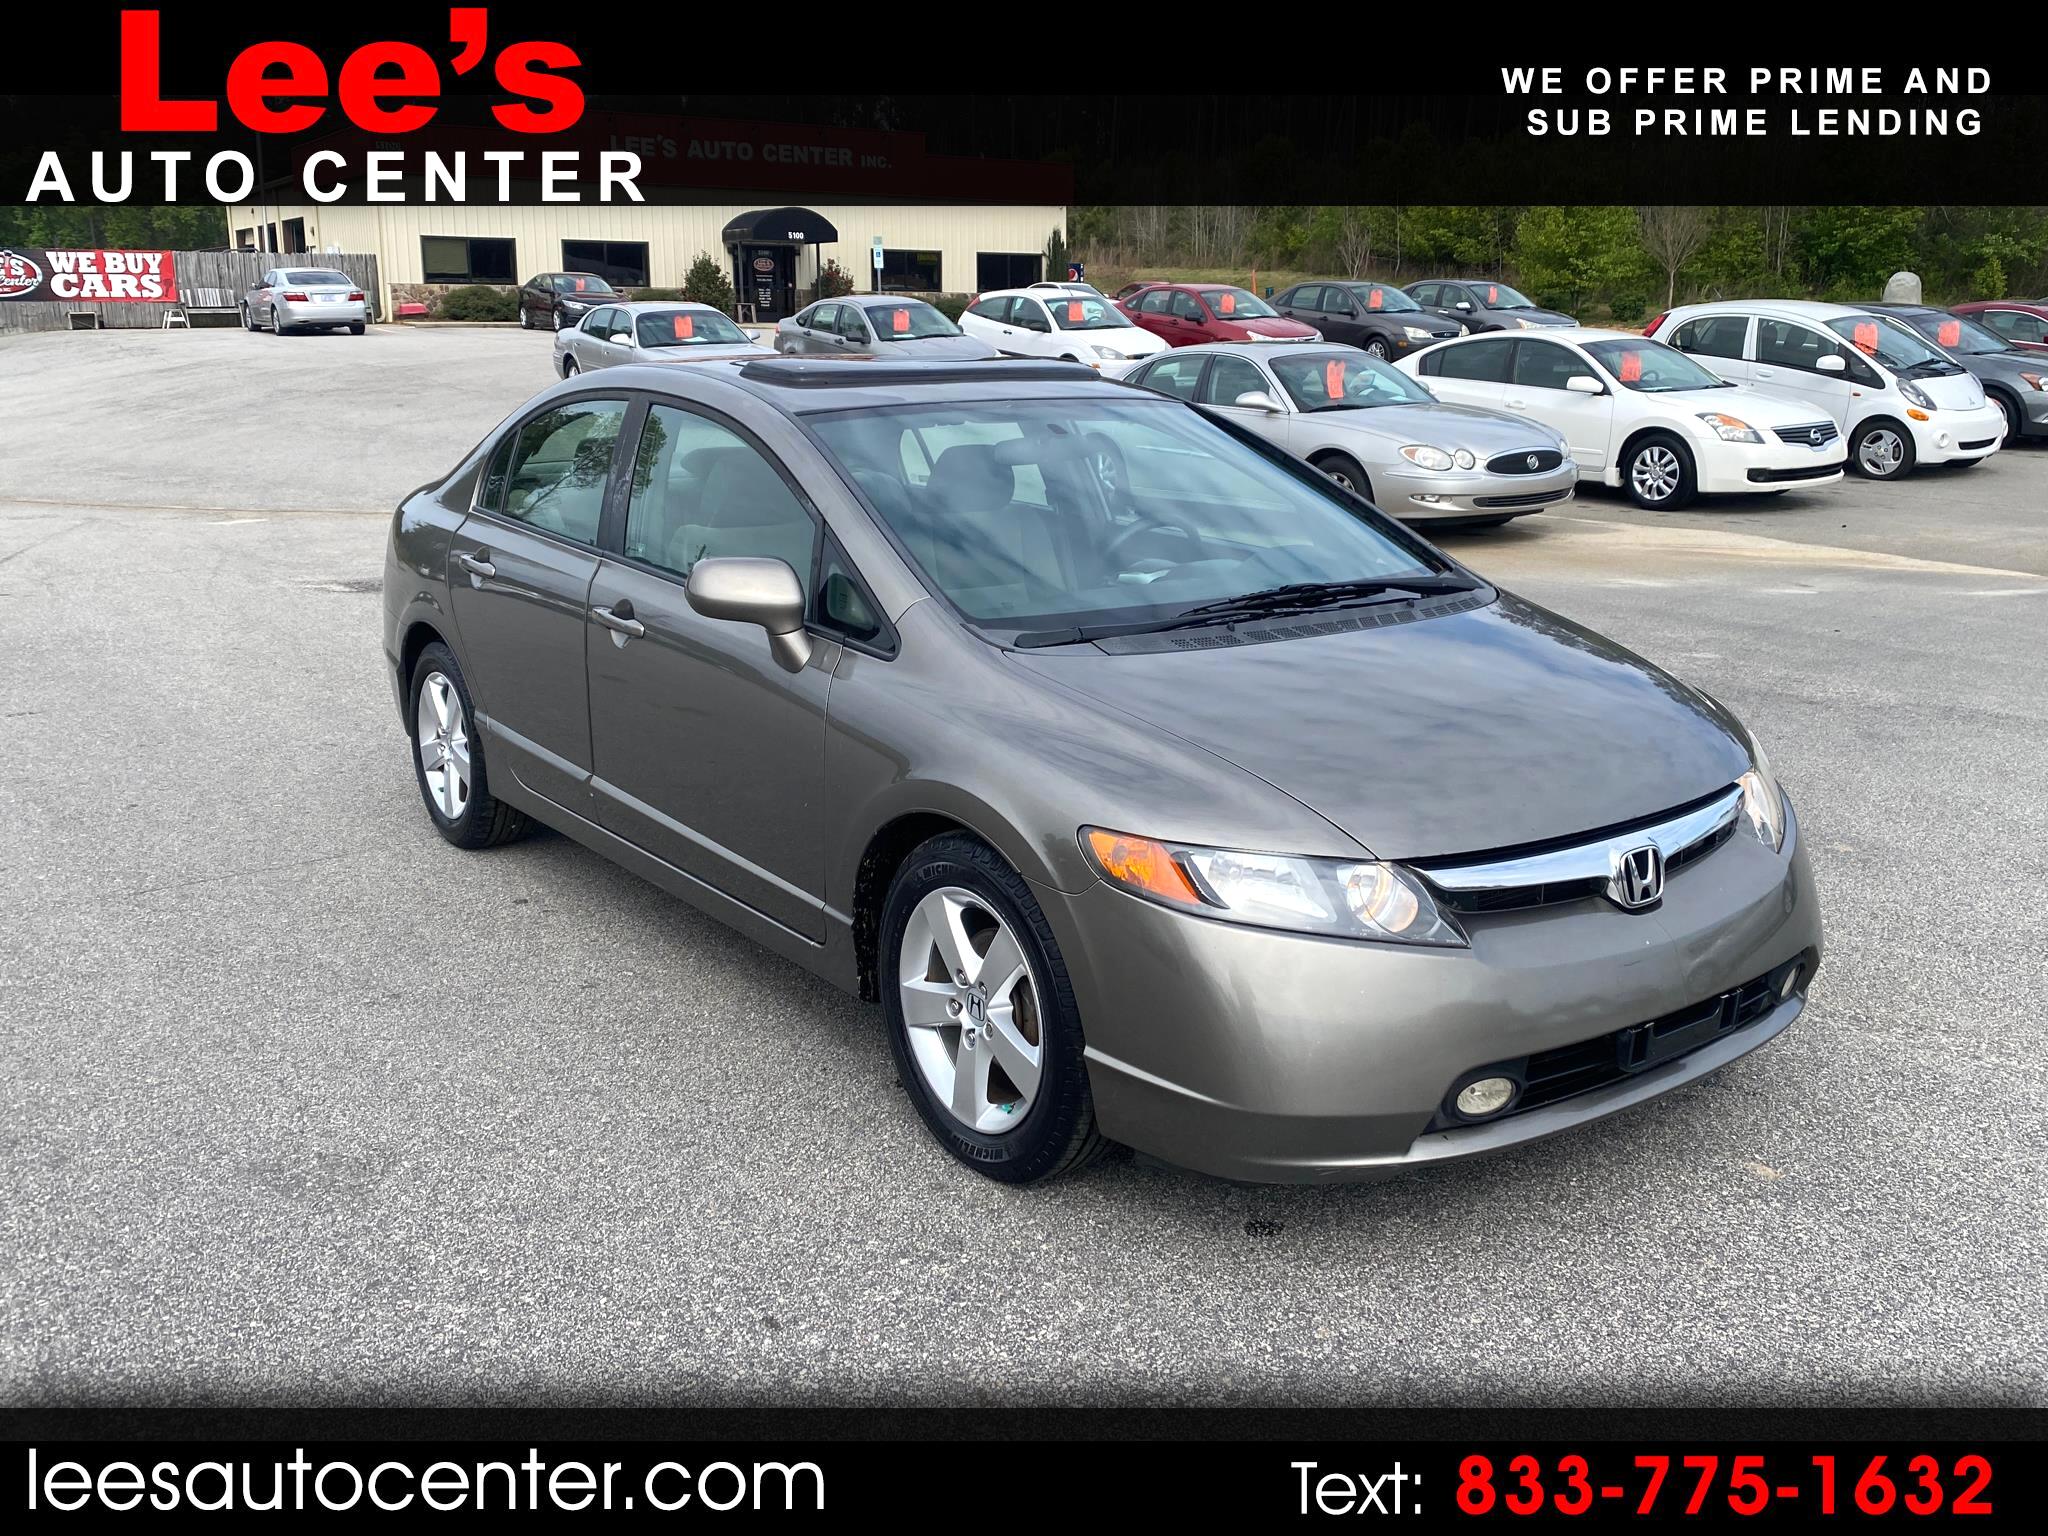 Used Cars for Sale Raleigh NC 27603 Lee's Auto Center